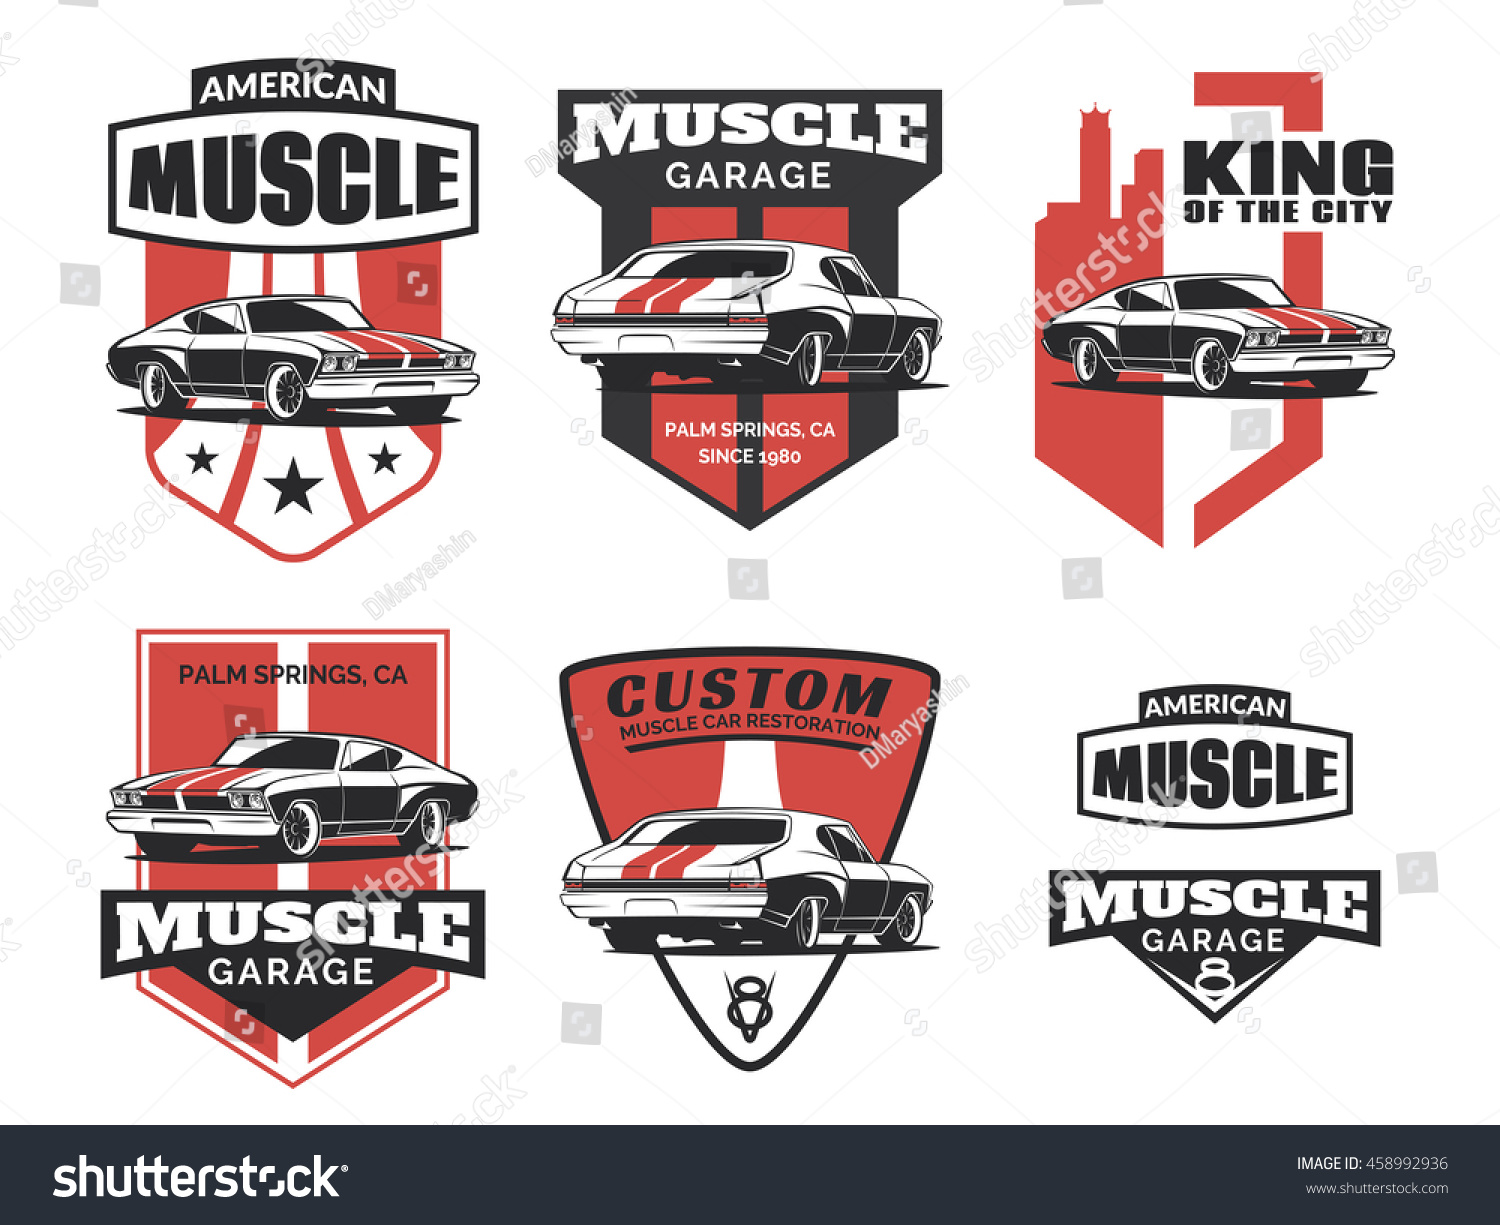 Set of classic muscle car logo, emblems, badges and icons isolated on white background. Car club design elements. Old vintage car service and restoration emblems. Vector. #458992936